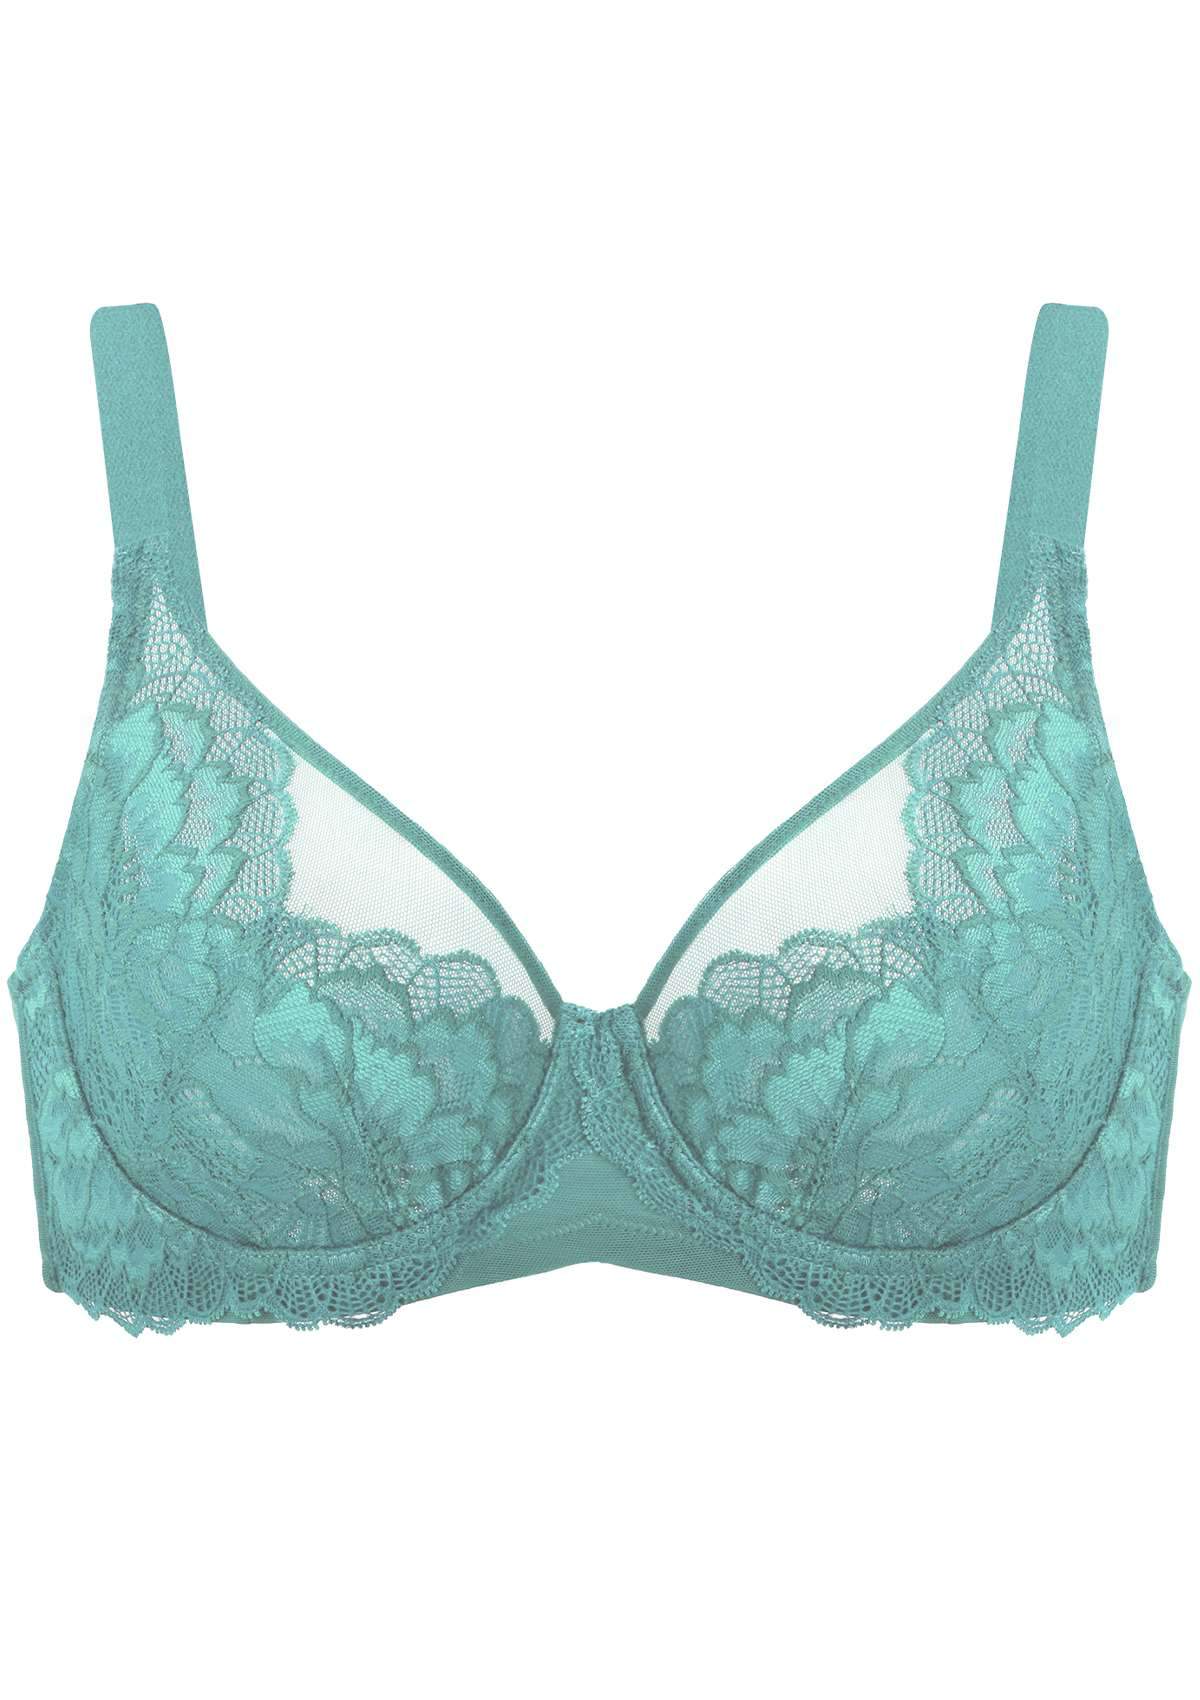 HSIA Peony Lace Unlined Supportive Underwire Bra - Light Coral / 36 / C